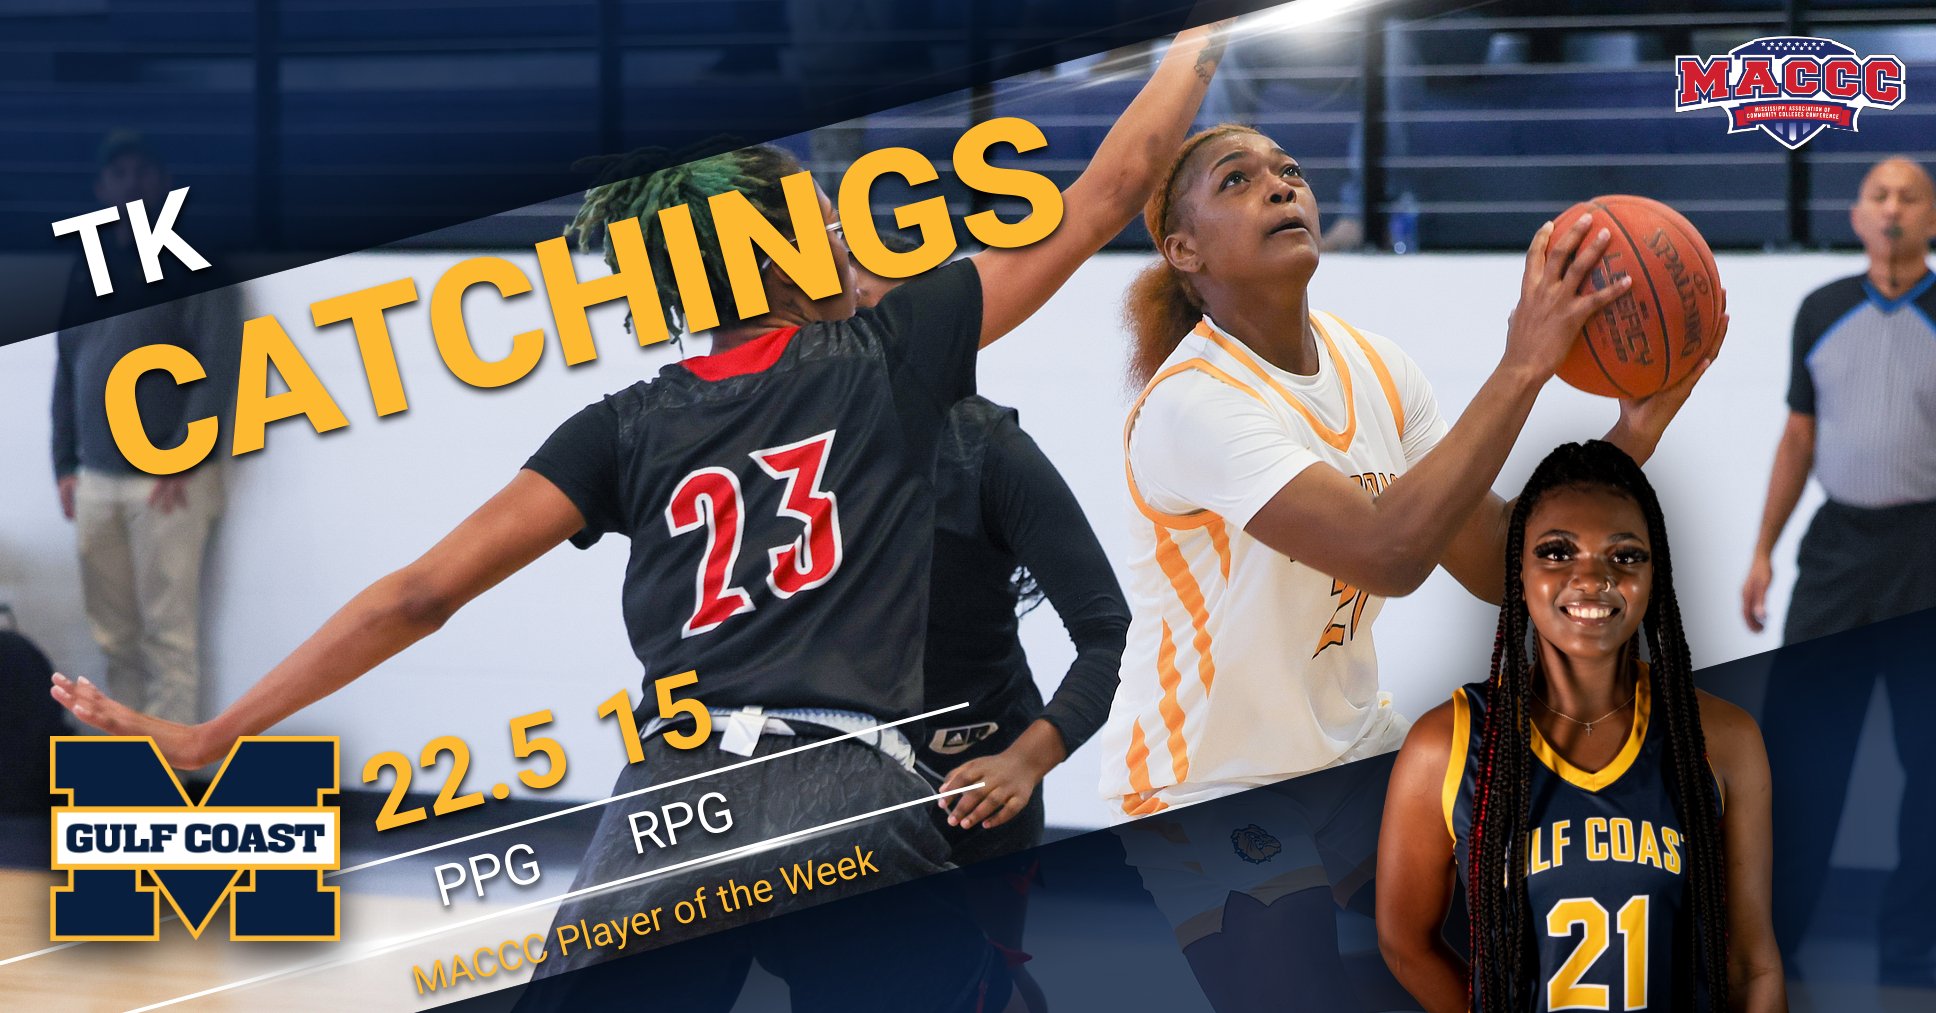 Catchings wins Player of the Week